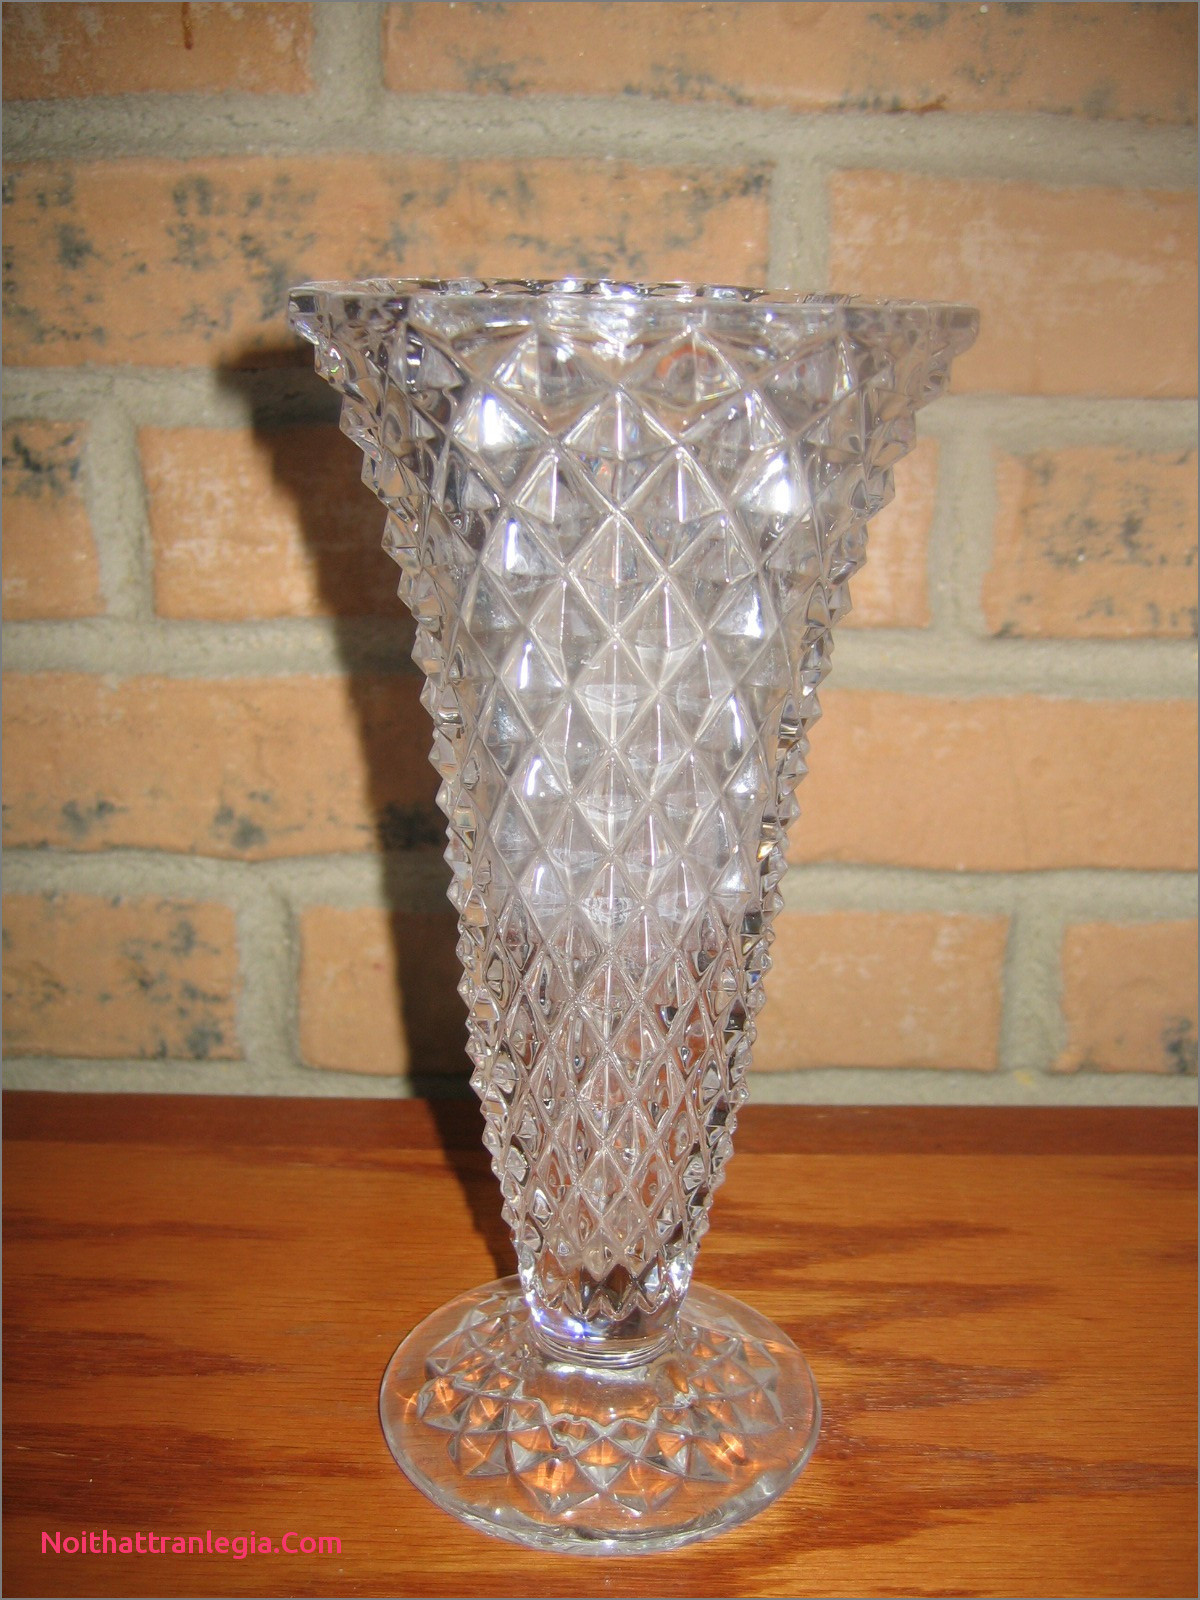 23 Lovely Tall Thick Glass Vase 2024 free download tall thick glass vase of 20 cut glass antique vase noithattranlegia vases design throughout glass vase decoration ideas vases antique crystal 2 gorgeous edwardian cut lead glass